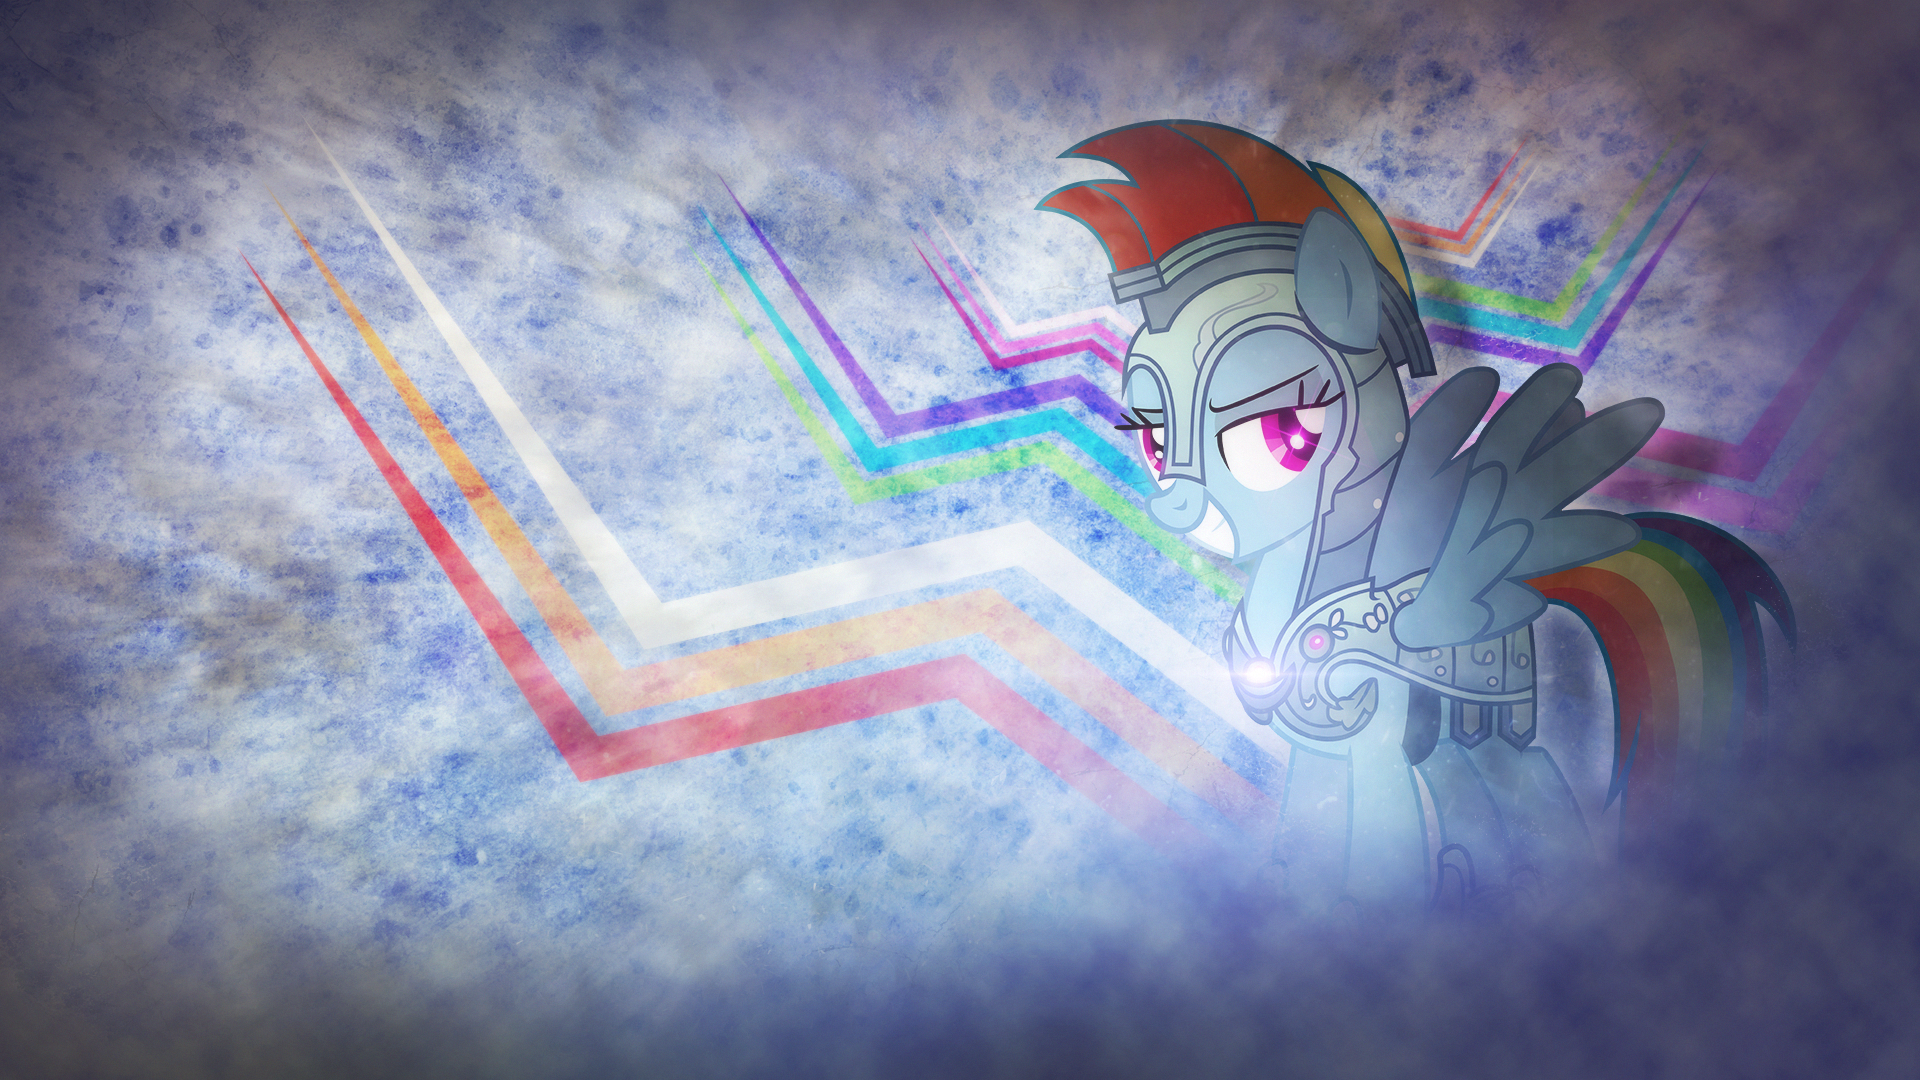 Wallpaper ~ Armored Dash. by CaNoN-lb and Mackaged